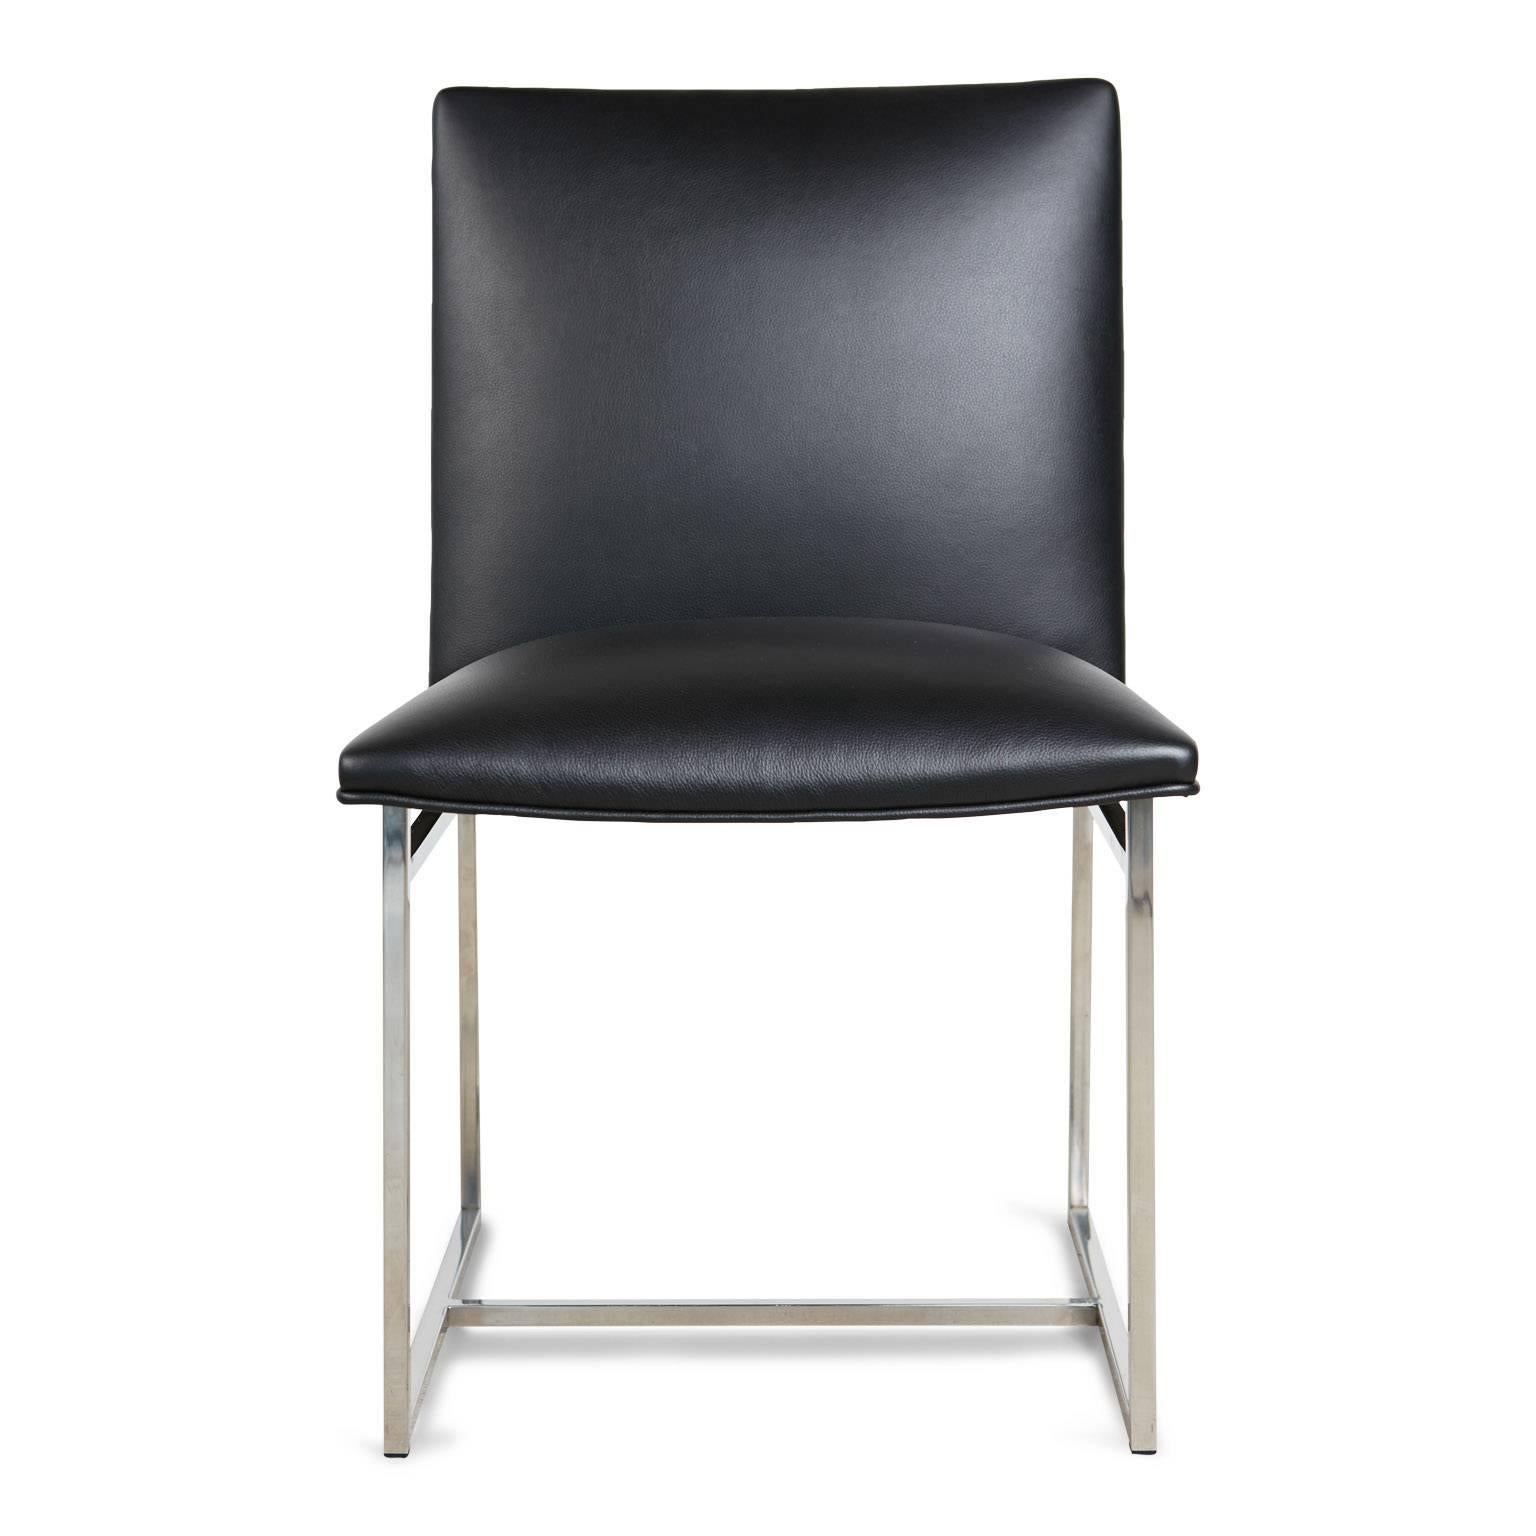 Comprised of a structural, angular, reflective chrome base with seat that has been newly upholstered in a high quality black, grained Edelman leather. The backs and seats have a slightly concave shape and are wonderfully comfortable along with being